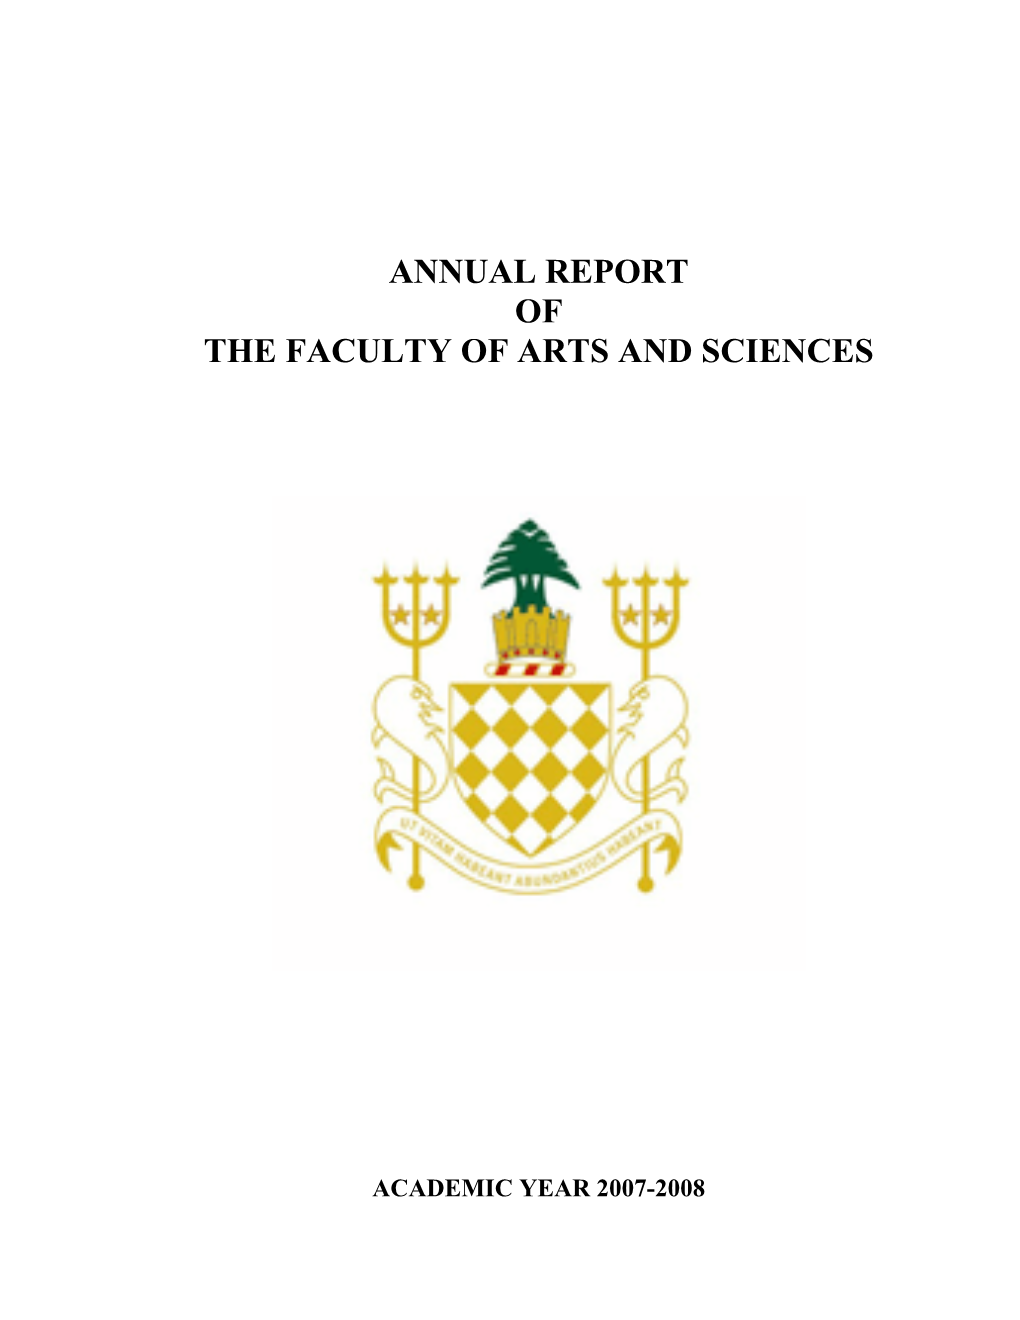 Annual Report of the Faculty of Arts and Sciences